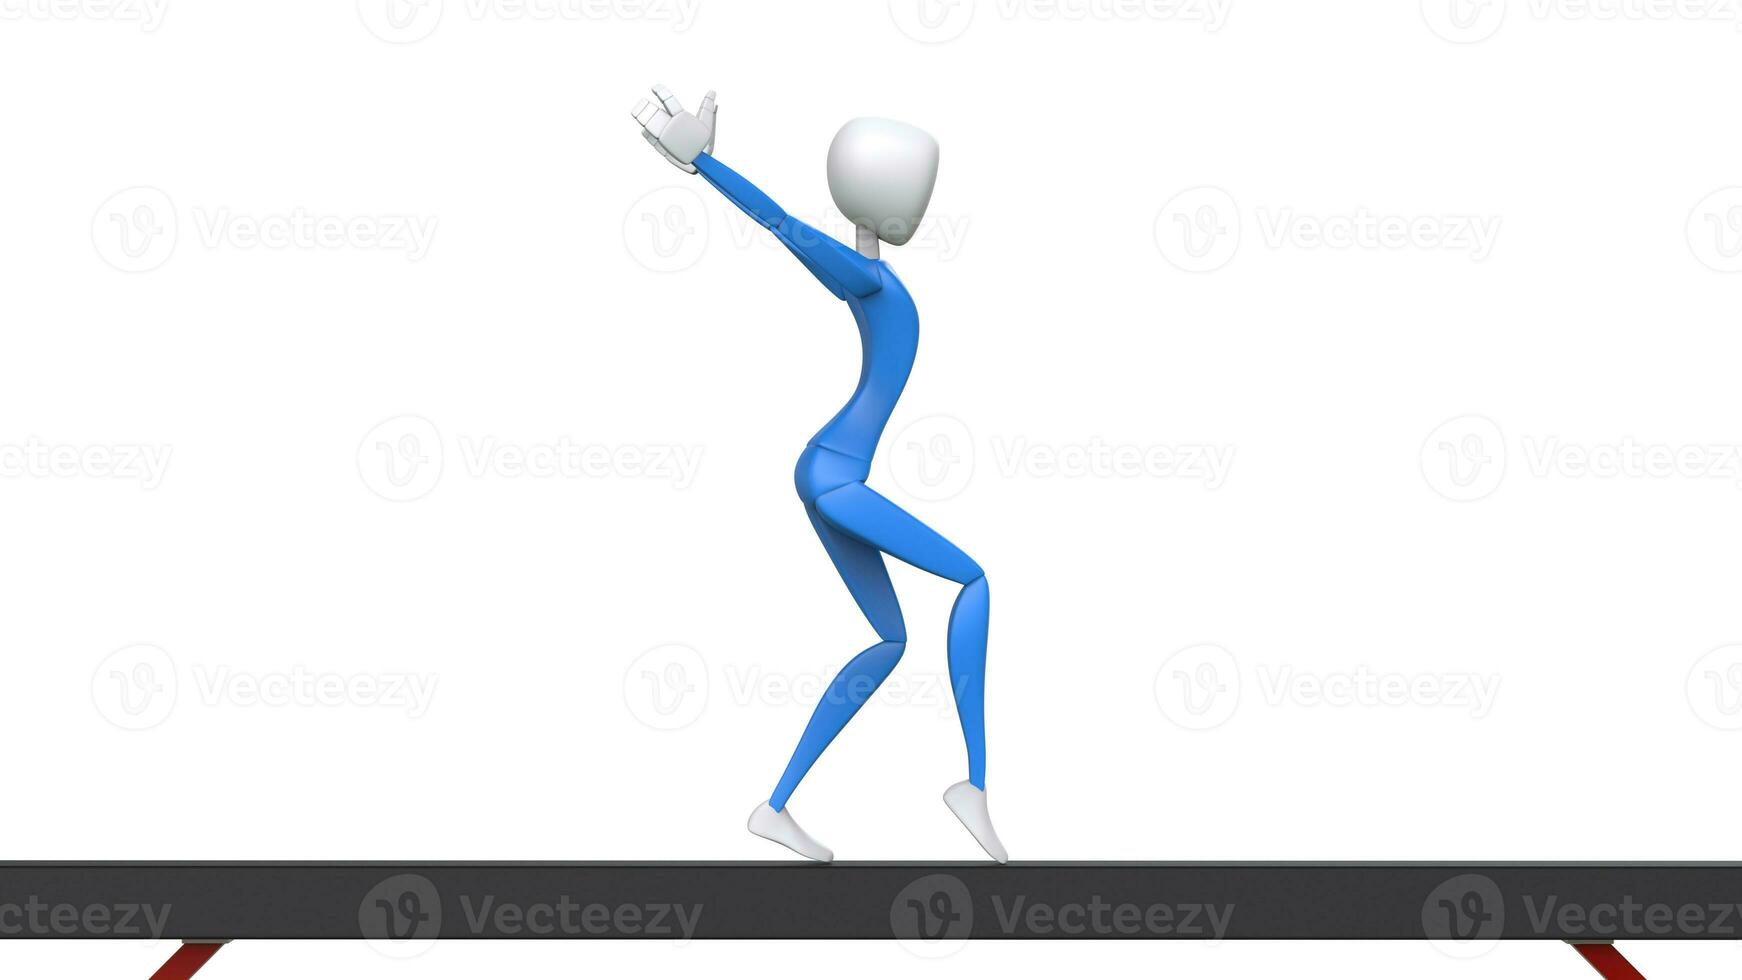 Olympic gymnast in blue outfit - balance beam routine - 3D Illustration photo